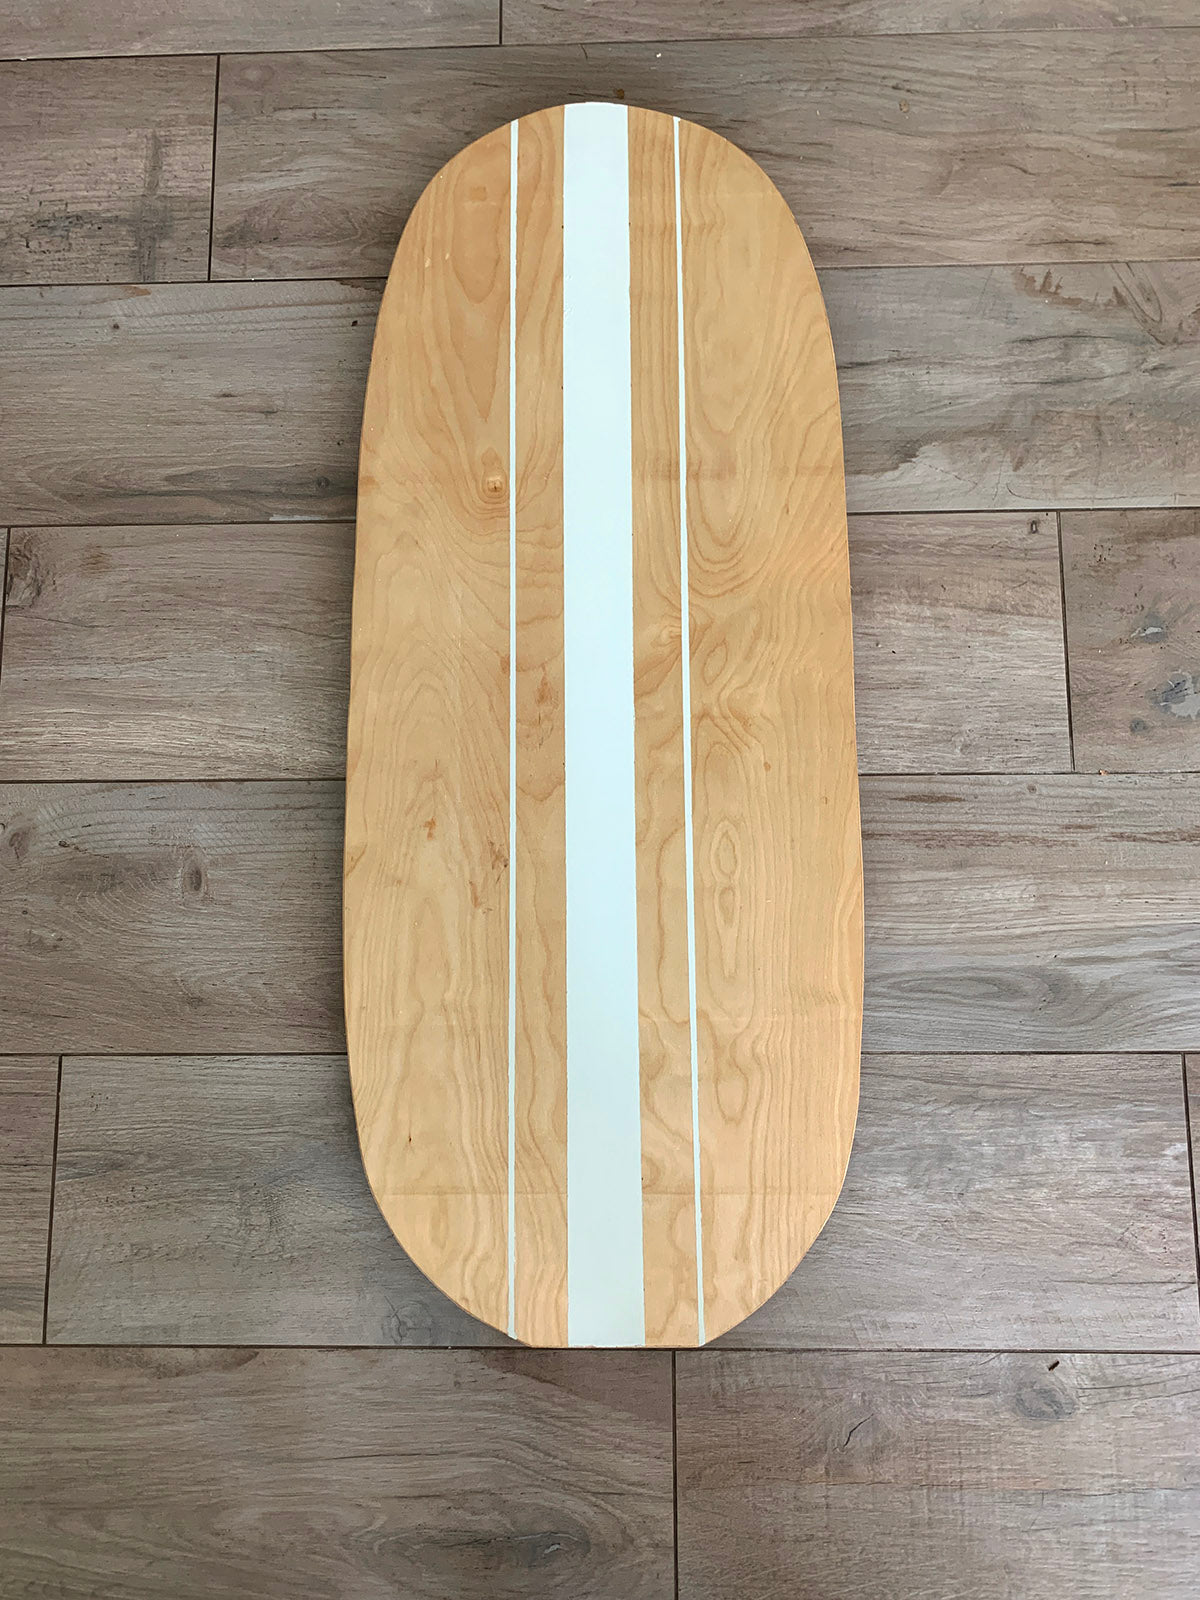 BUILD YOUR OWN BALANCE BOARD